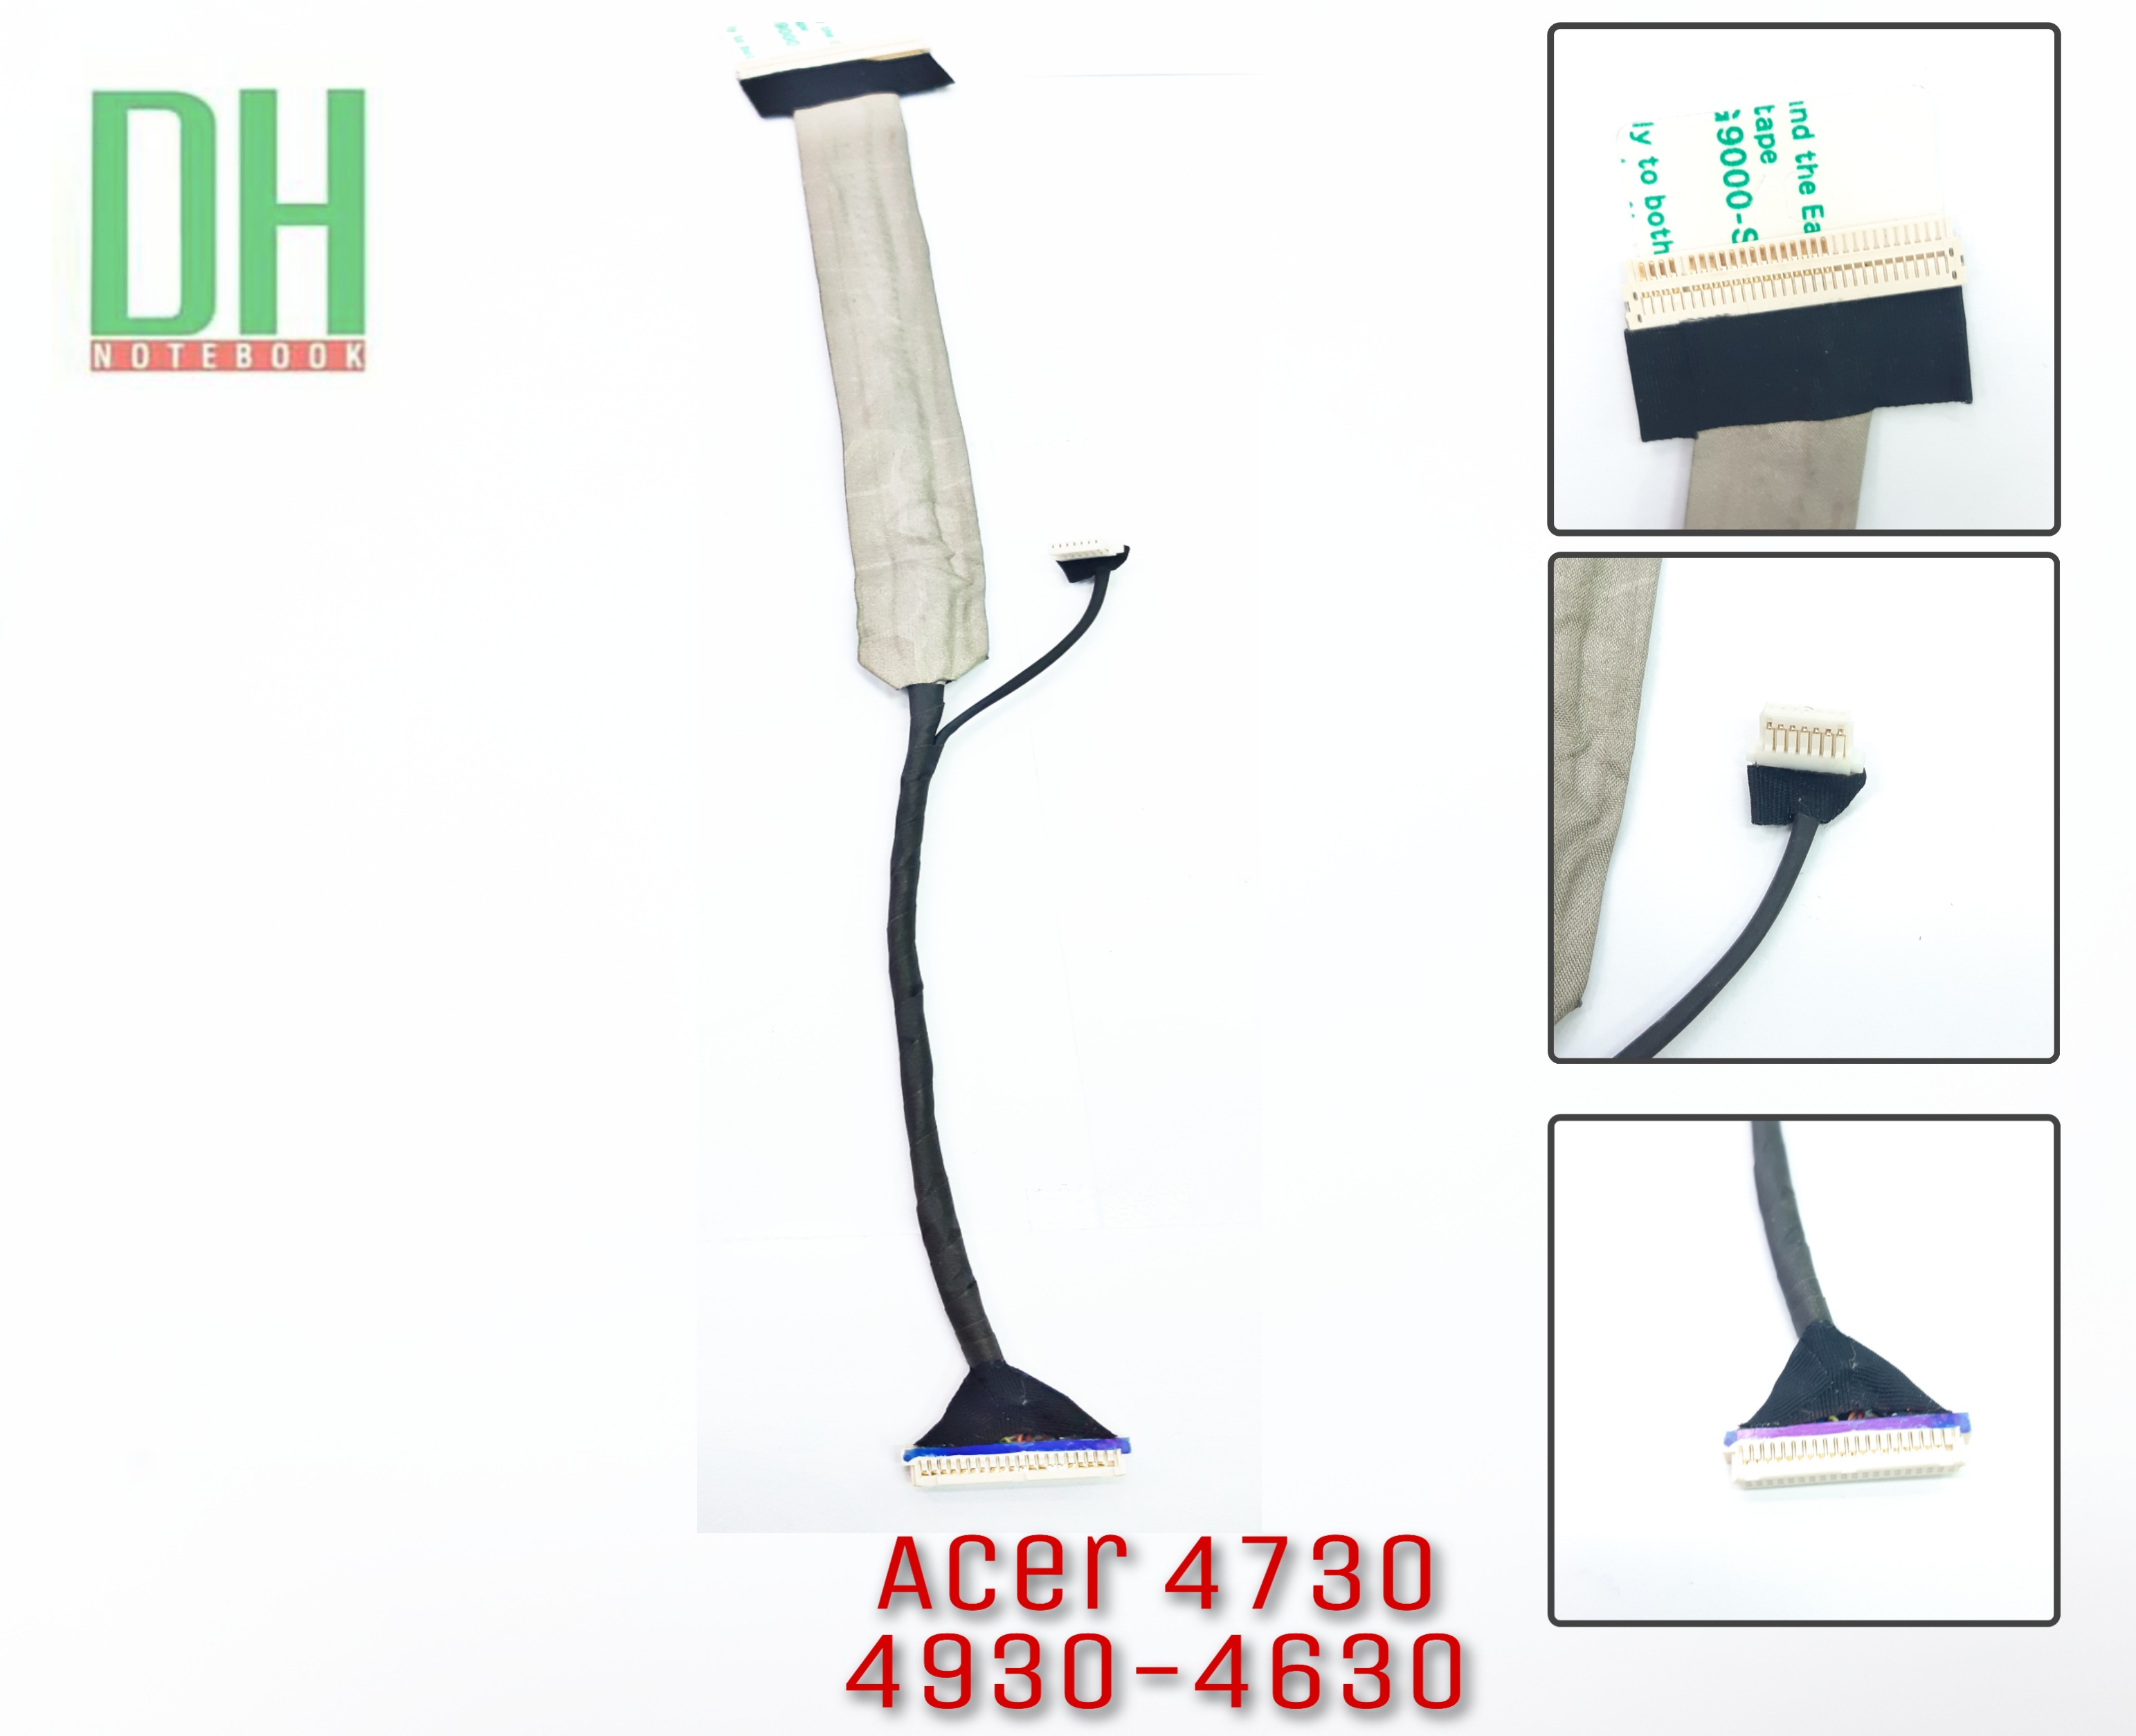 Acer 4730 Video Cable